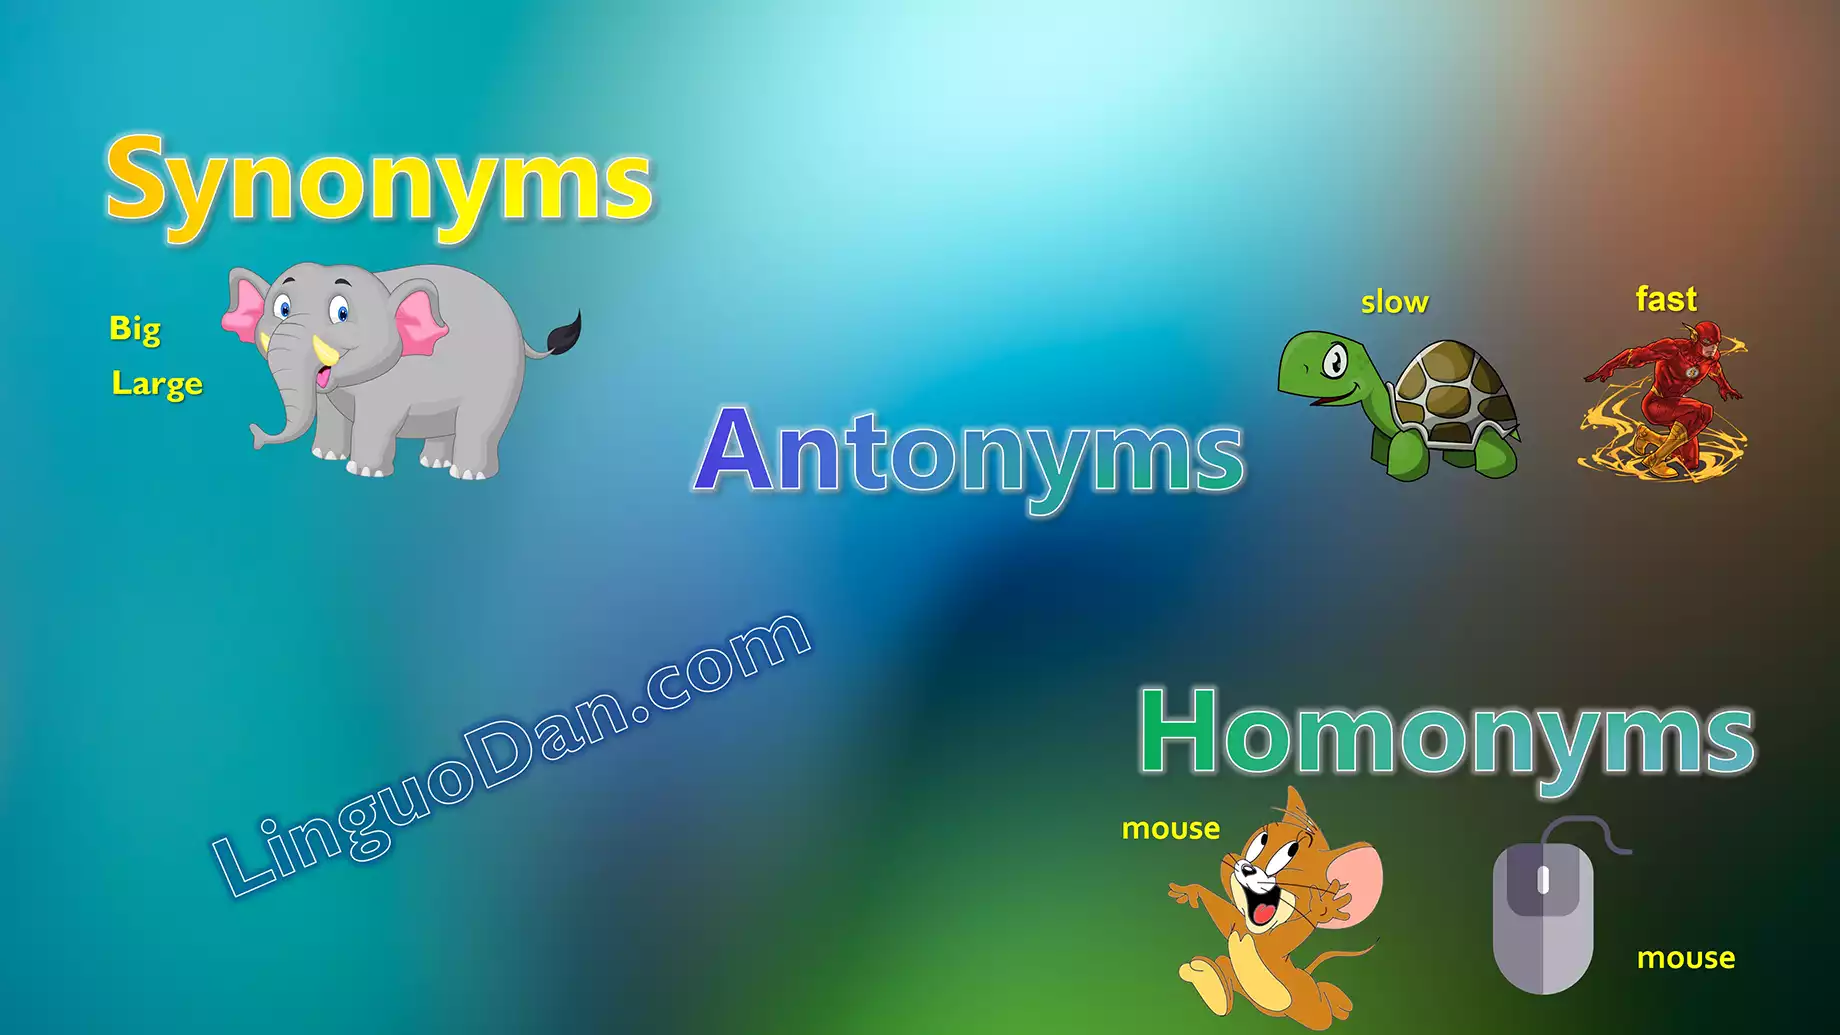 What Are Synonyms, Antonyms, and Homonyms? - LinguoDan